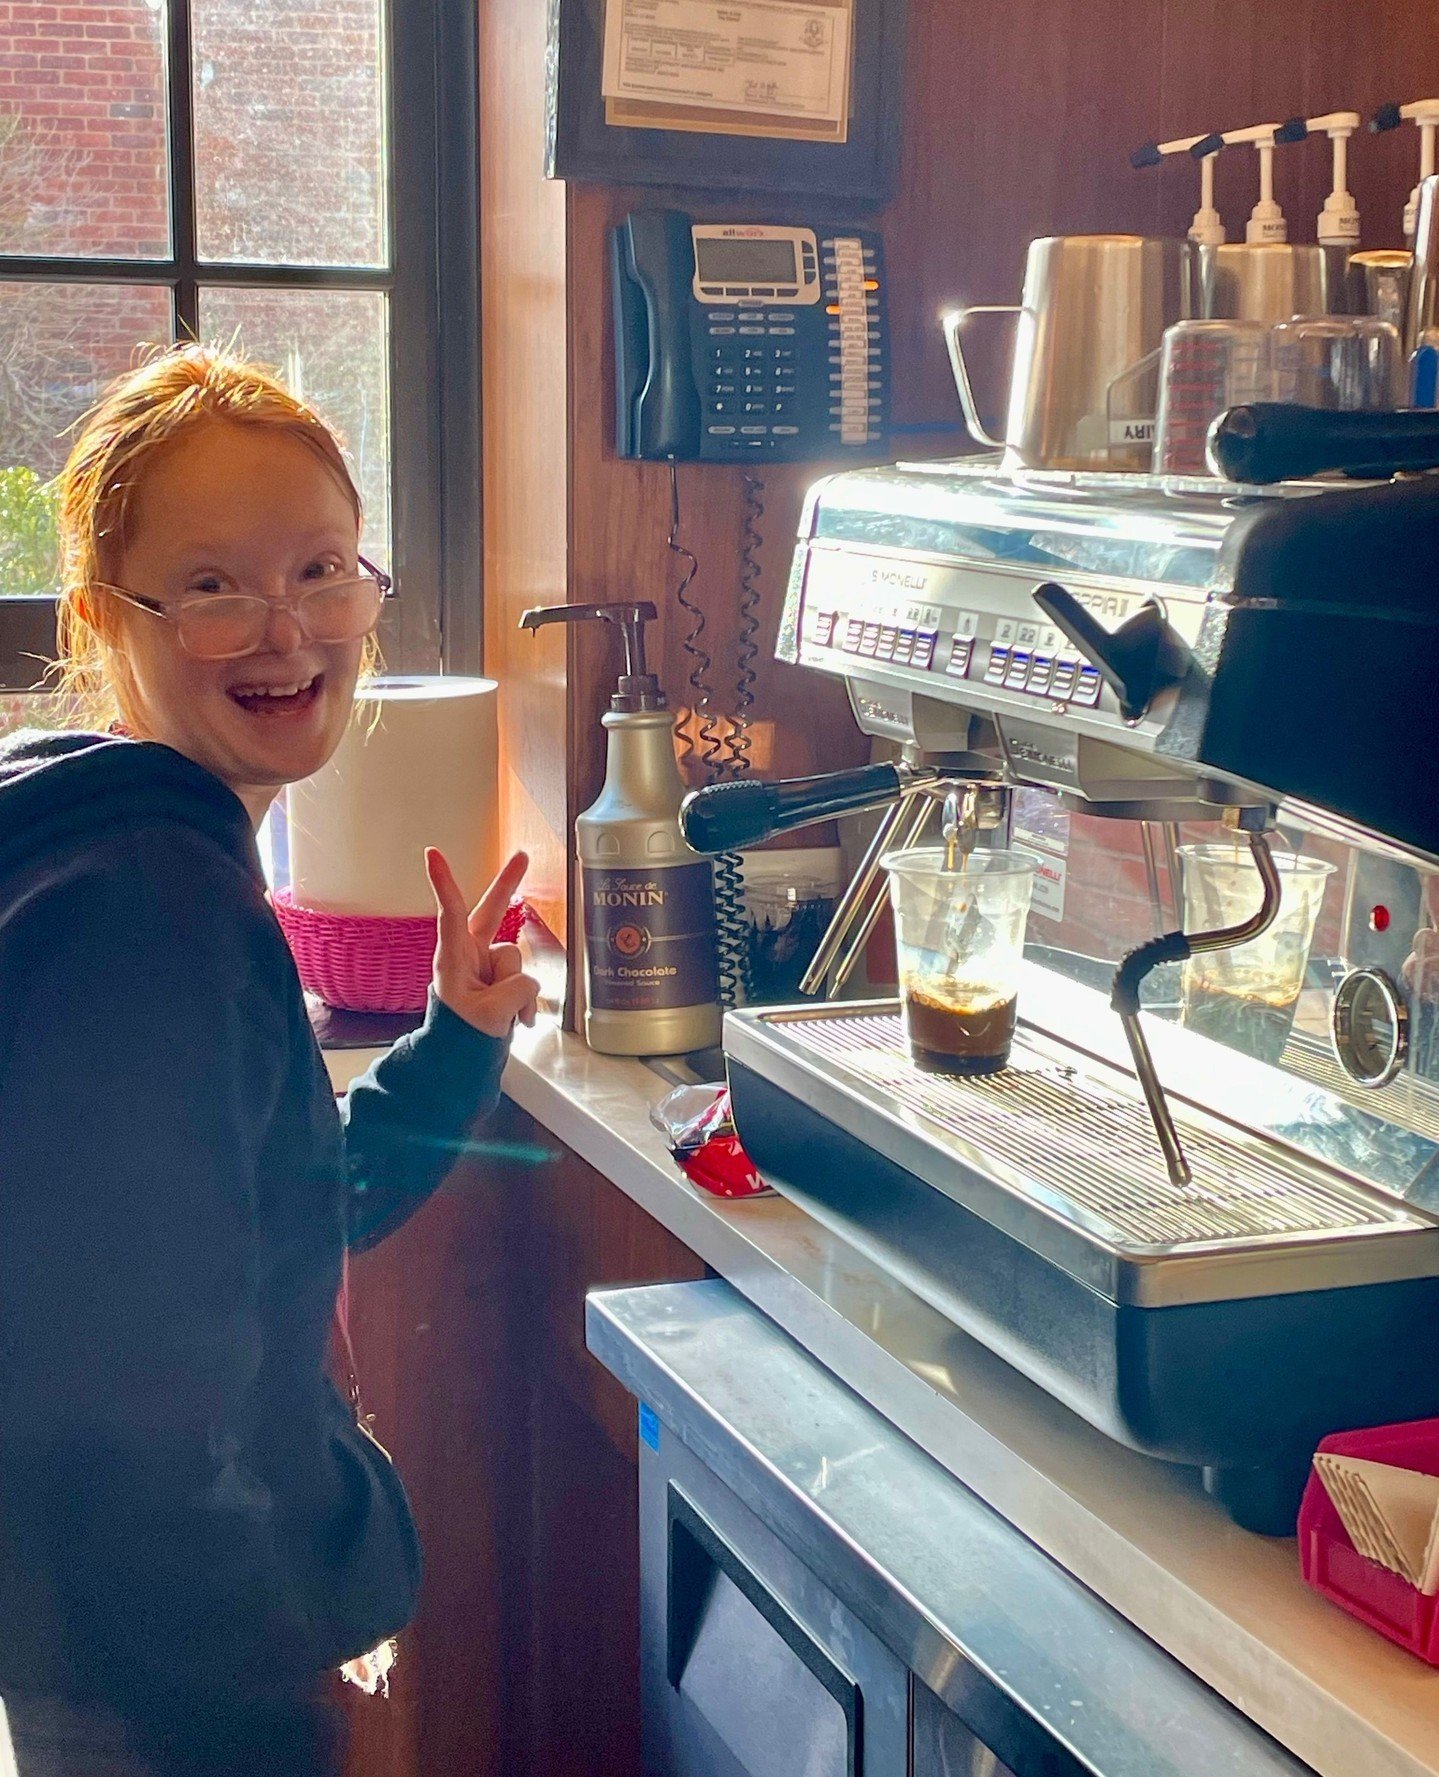 Hey Brooklyn ✌️💖 ⁠Stop in and say hi to us!⁠
.⁠
.⁠
.⁠
.⁠
.⁠
Photo caption: Brooklyn makes coffee in Heads Up Cafe while smiling and giving the peace sign. #SparkleOn #ProspectorTheater #WorkingIsWorking